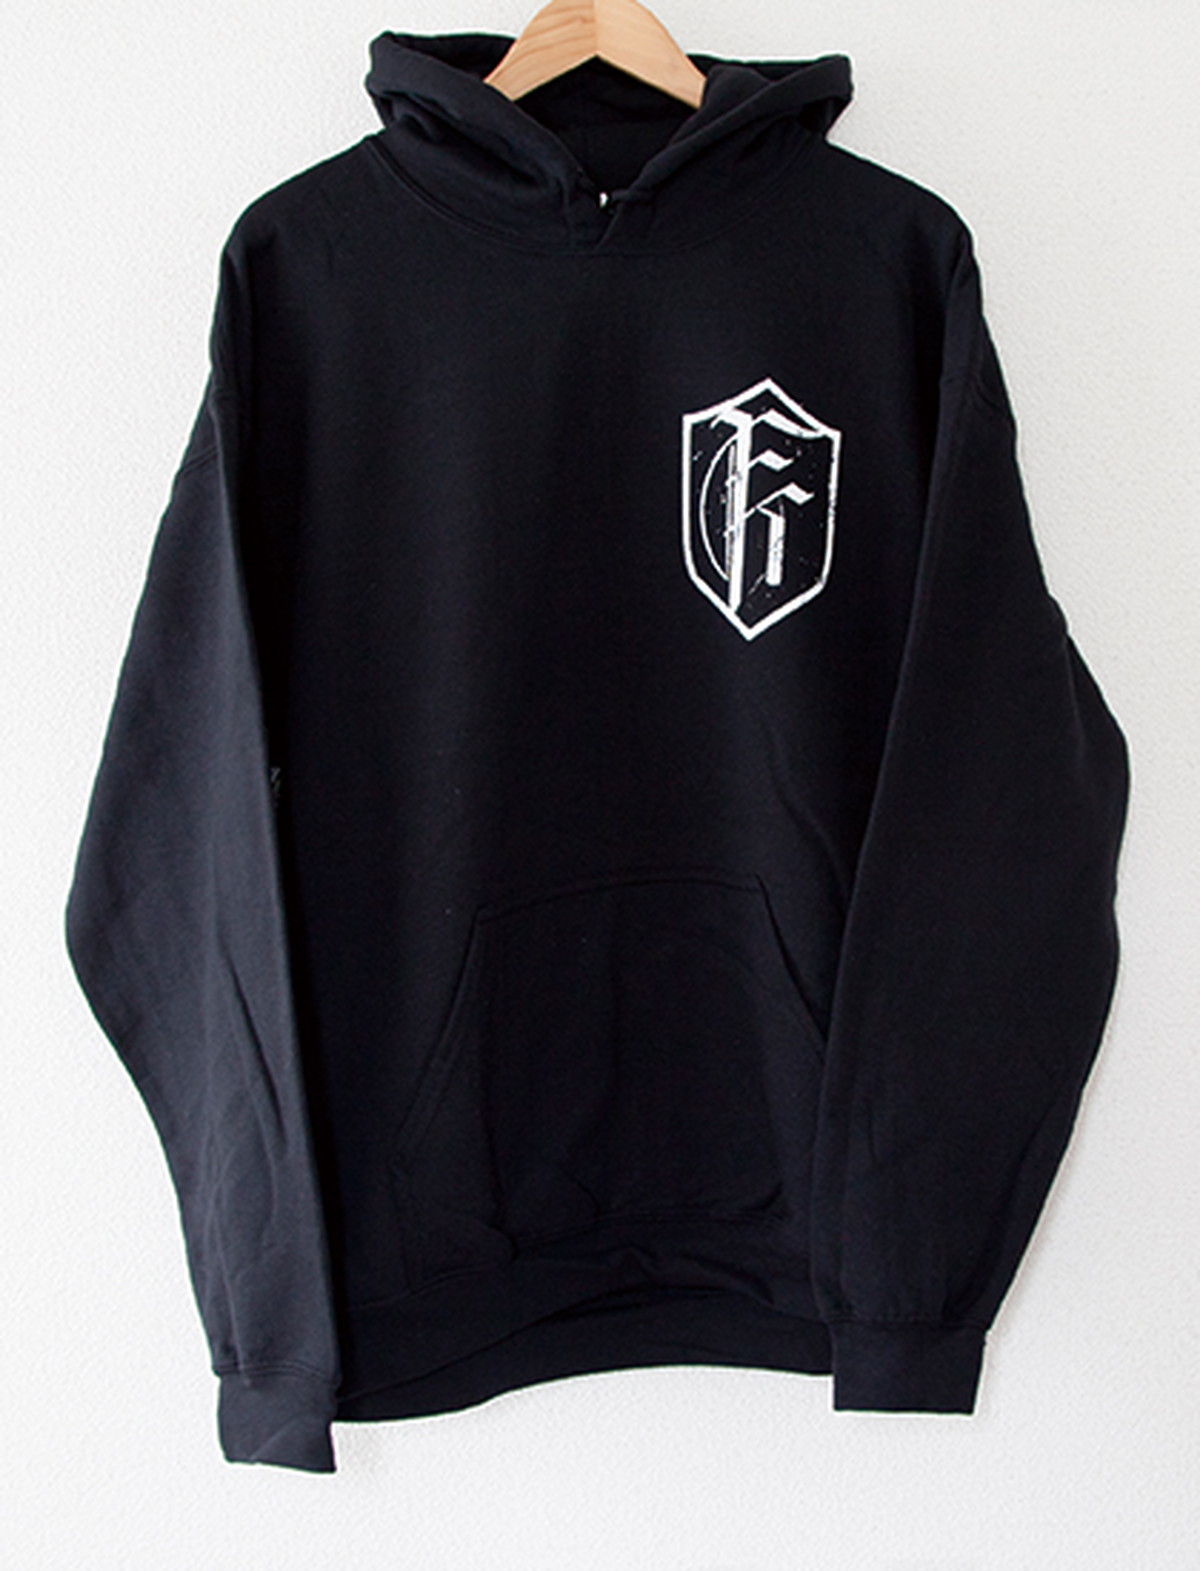 【FIT FOR A KING】American Metalcore Hoodie (Black) | NM Merch